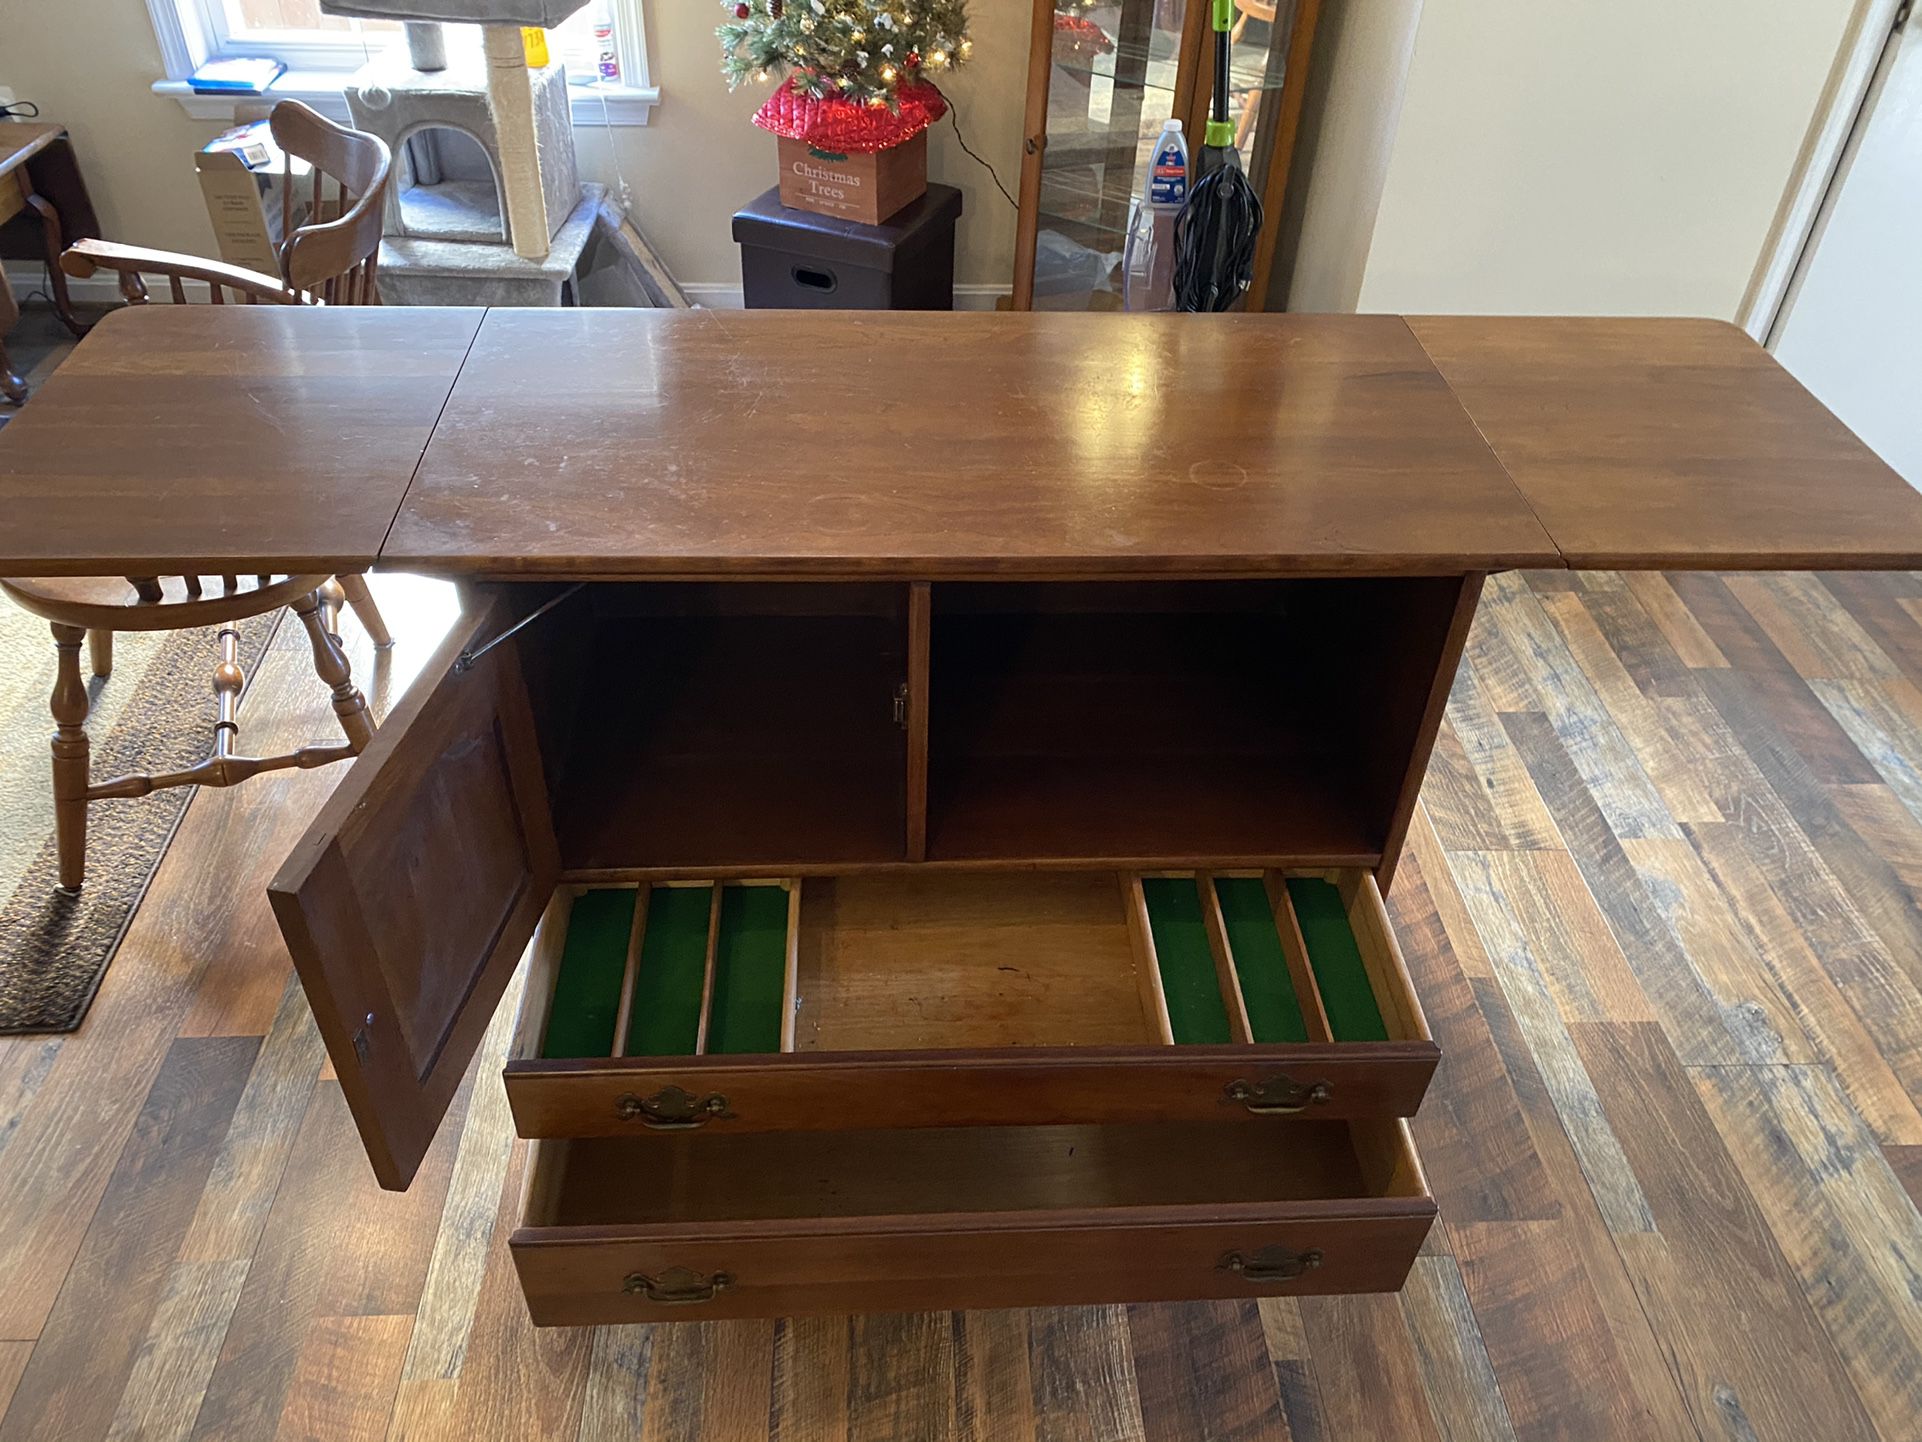 Small Bar Server With Flatware Drawer Ans Storage !